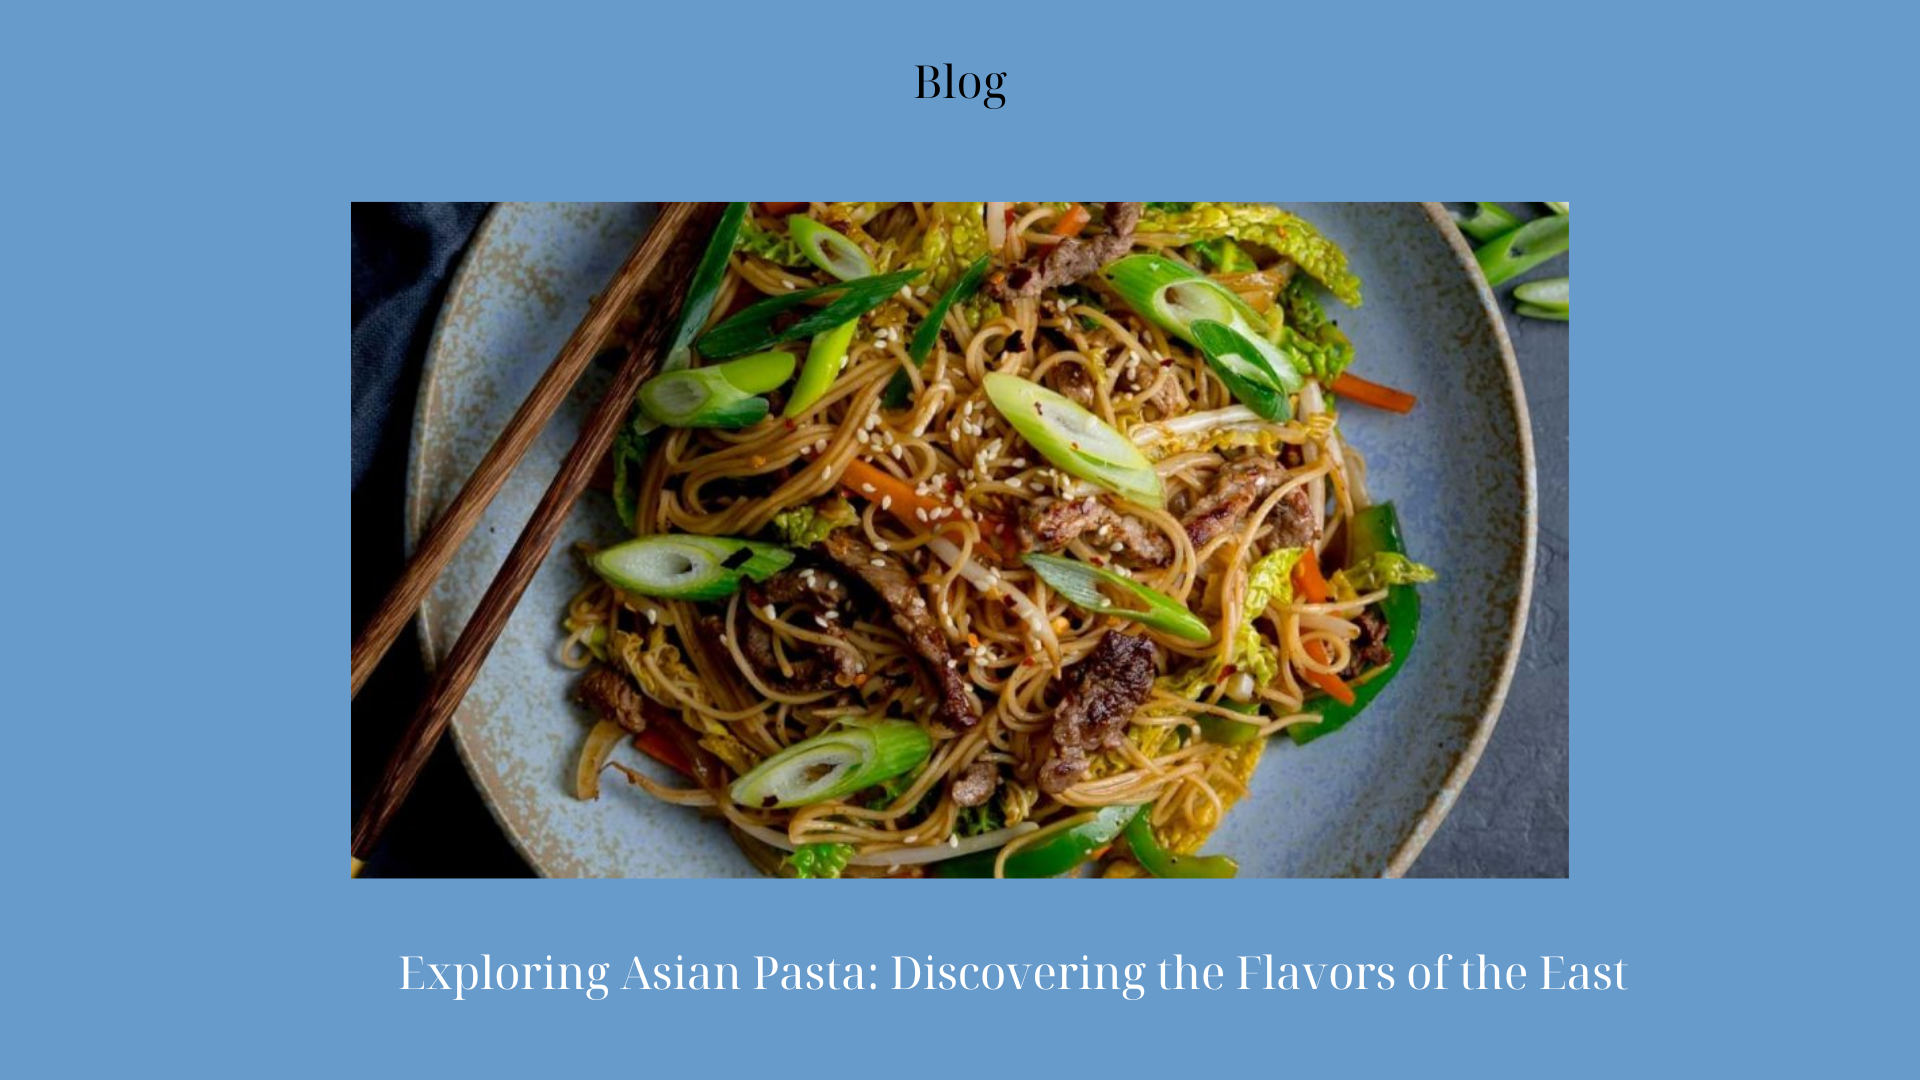 Explore Asian Pasta Discovering the Flavors of the East